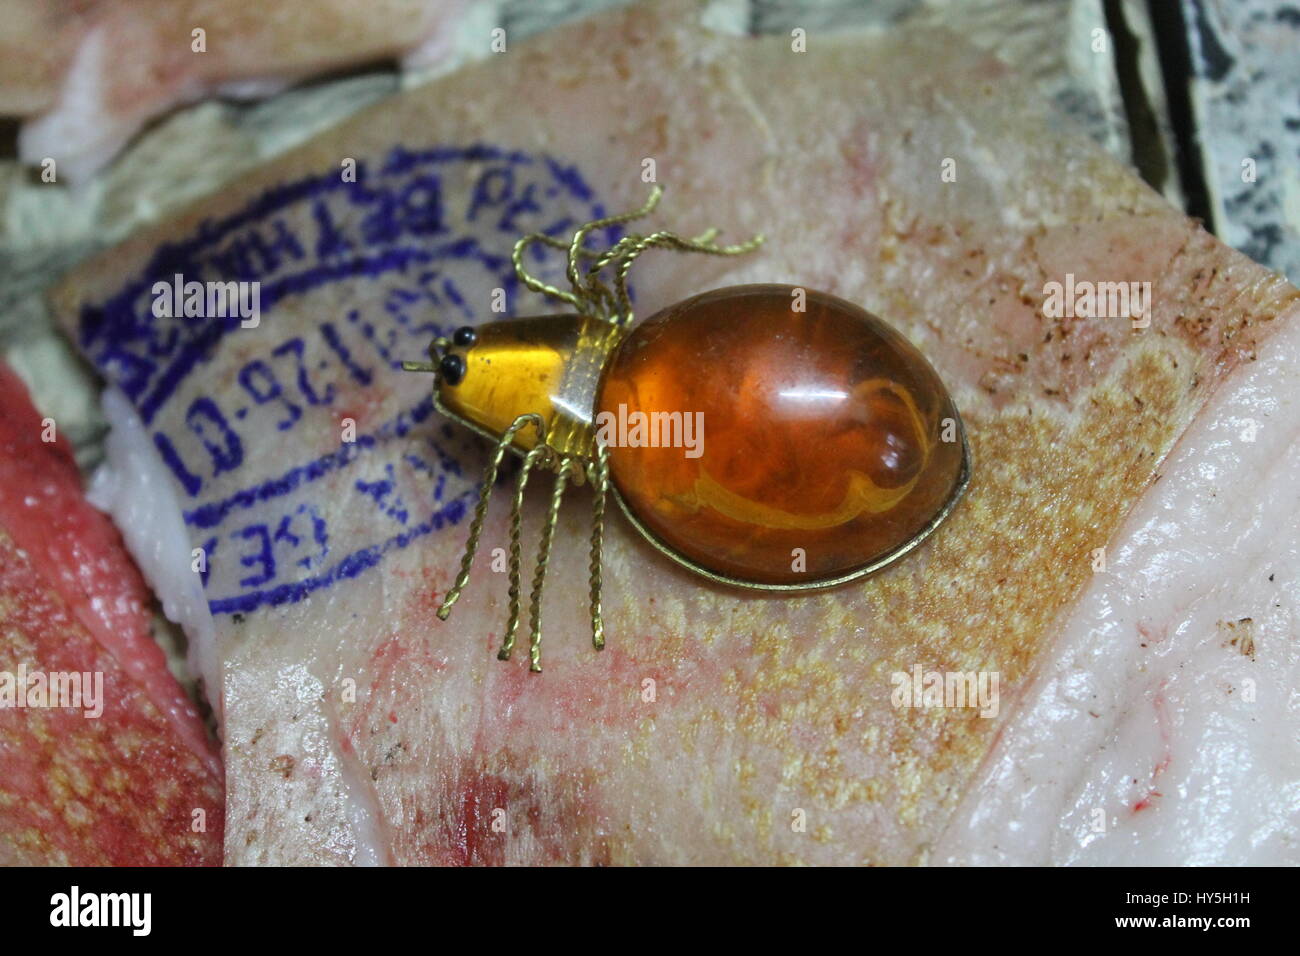 amber brooch in shape of spider lay on fresh bloody pork skin Stock Photo